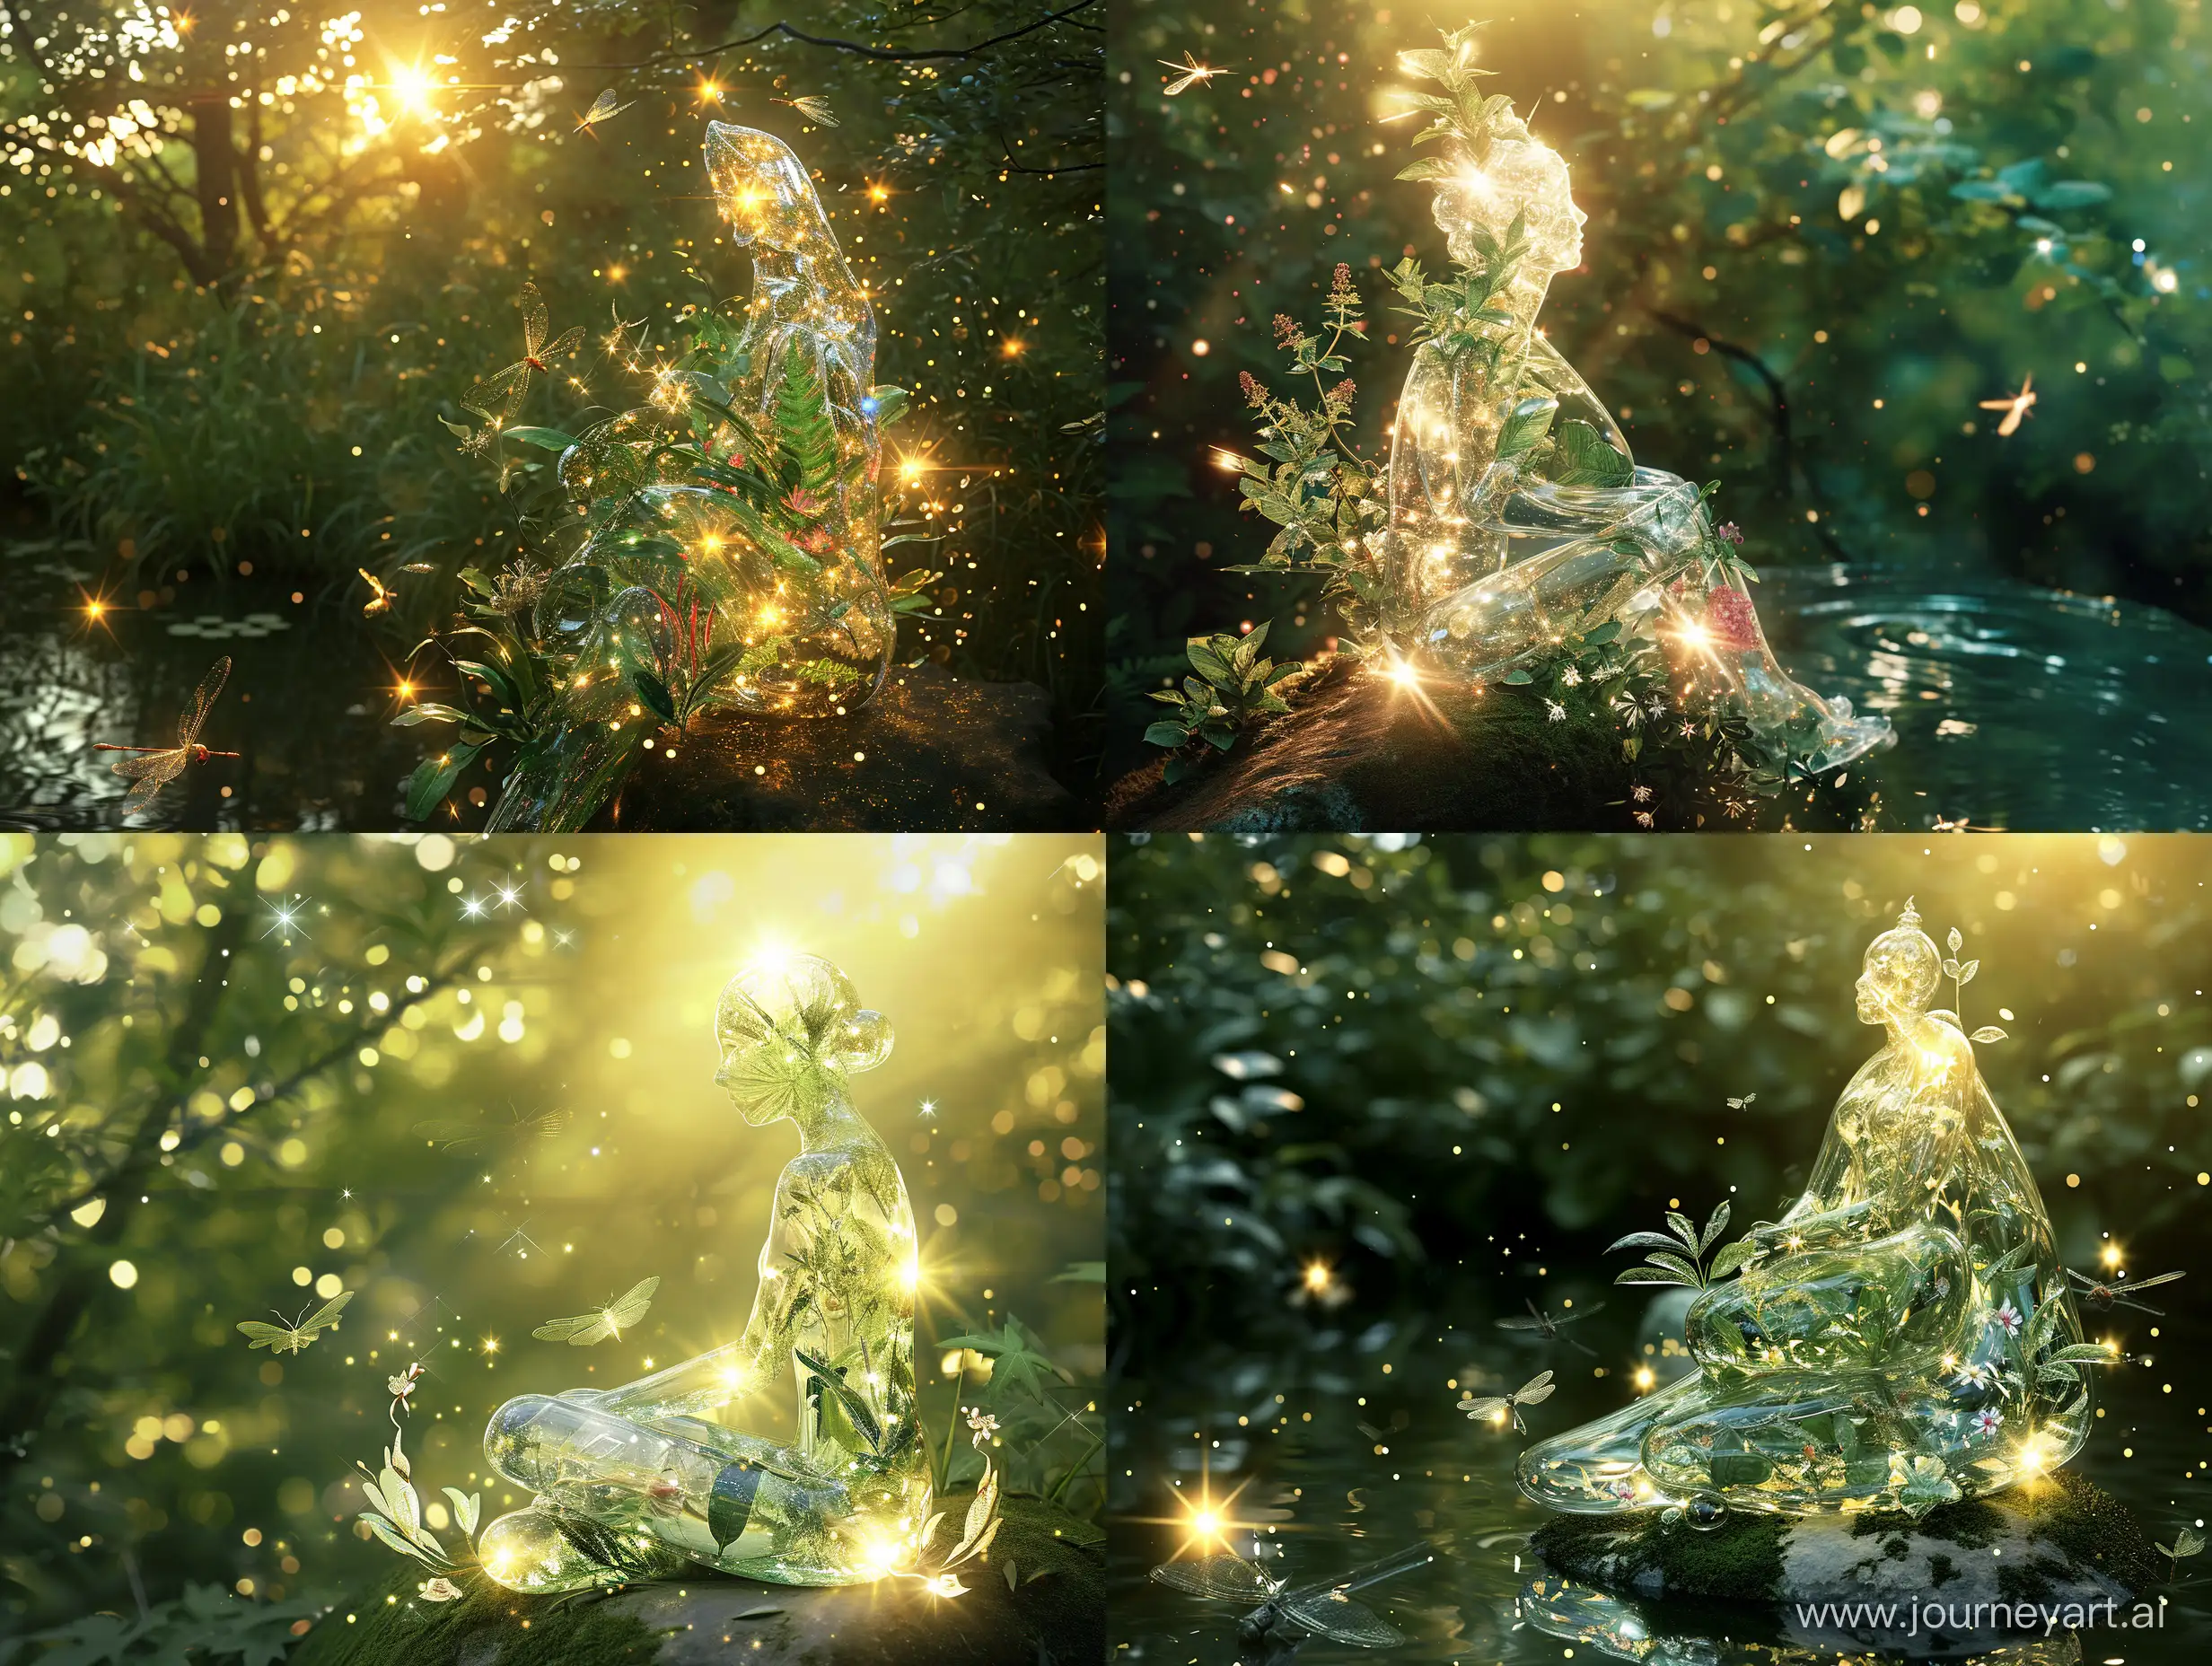 generate and image of a woman made of clear glass showing plants and flowers within, seated on a rock in a lush green forest. Ethereal lights, The sun illuminates the figure, casting a surreal glow and creating a dizzying kaleidoscope effect. The image also features dragonflies, and stars, all illuminated and reflecting the sparkles and gold shimmer.